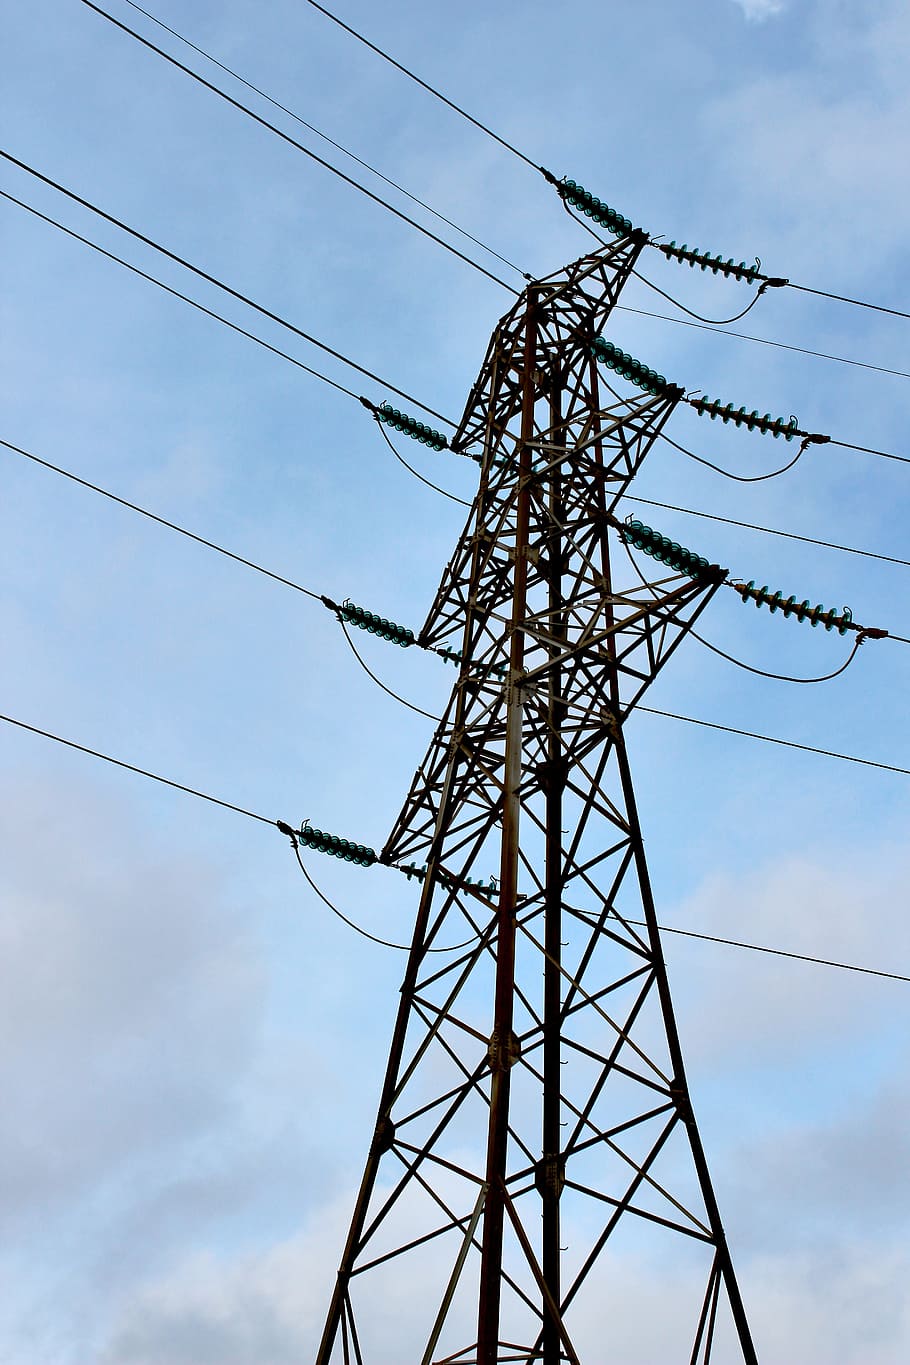 electric, electricity, power lines, voltage, line, volt, cable, fuel and power generation, power supply, electricity pylon